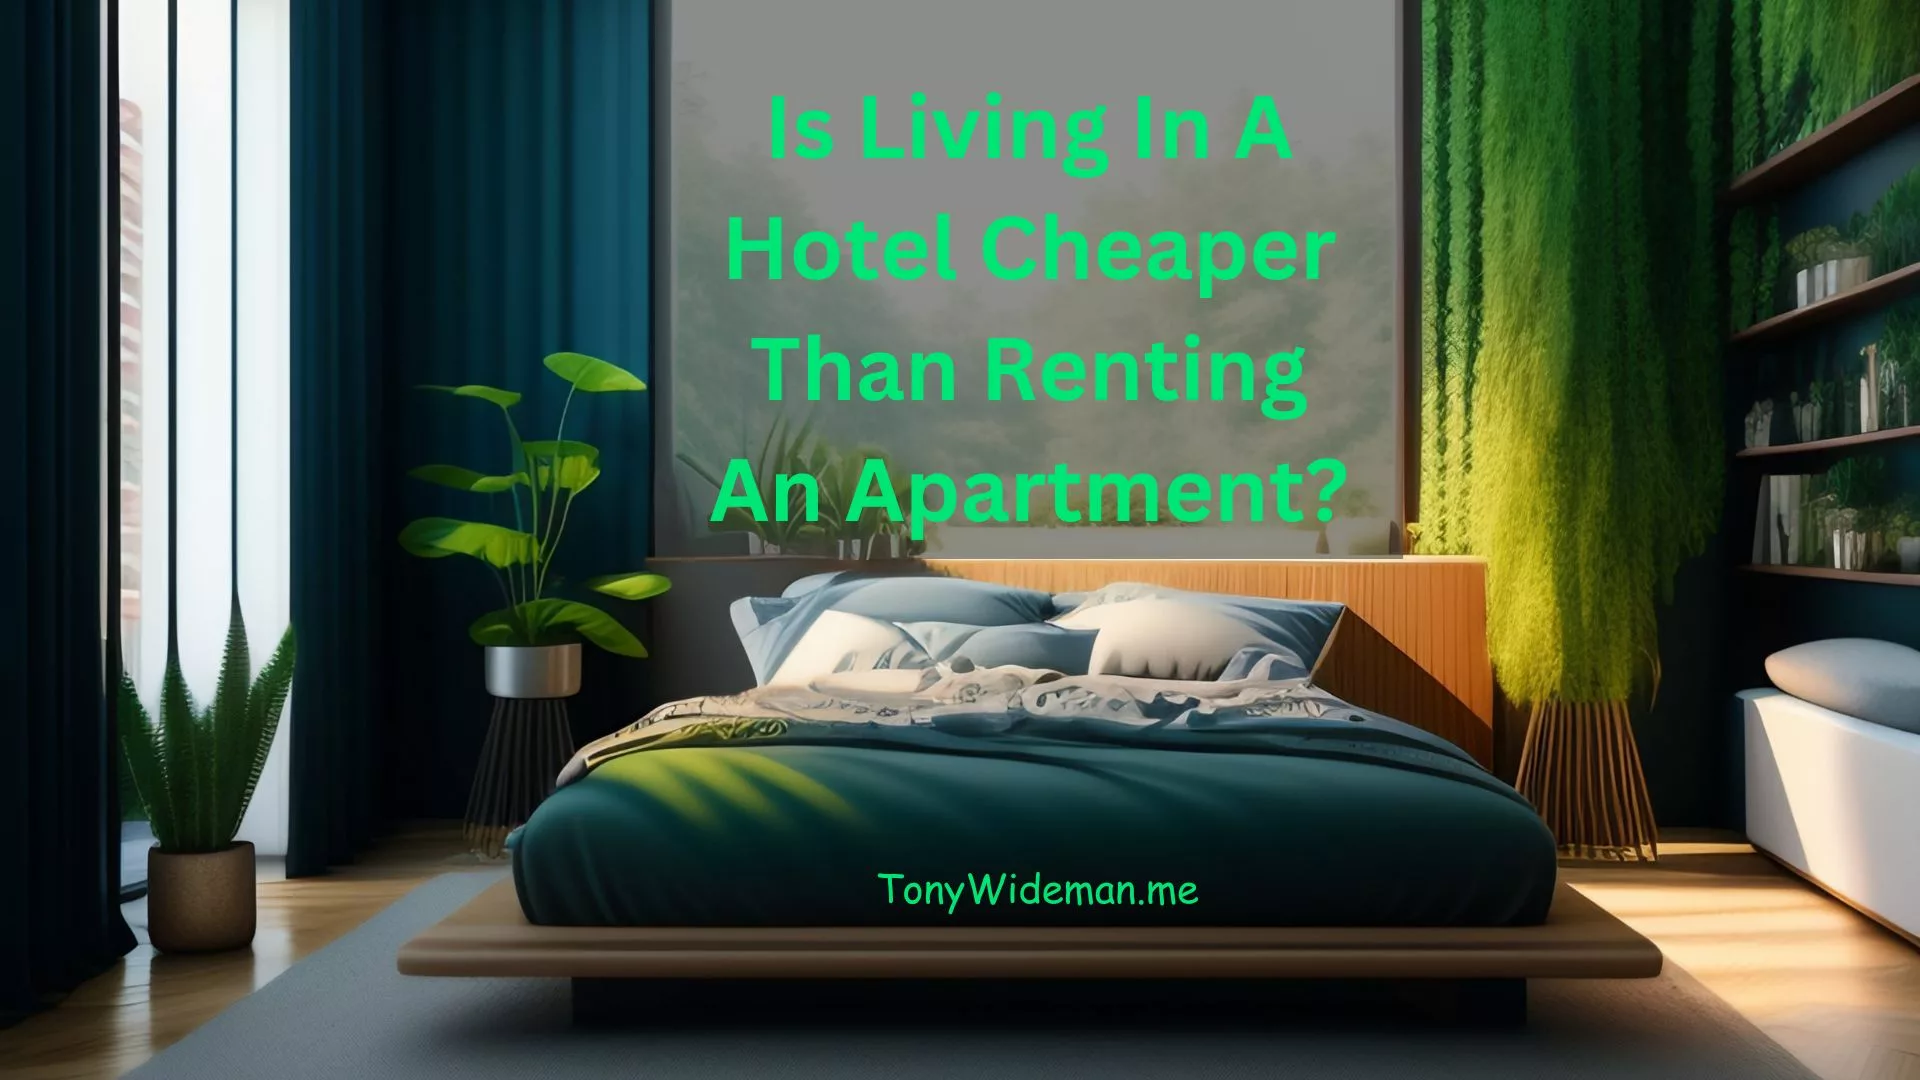 Is Living In A Hotel Cheaper Than Renting An Apartment?